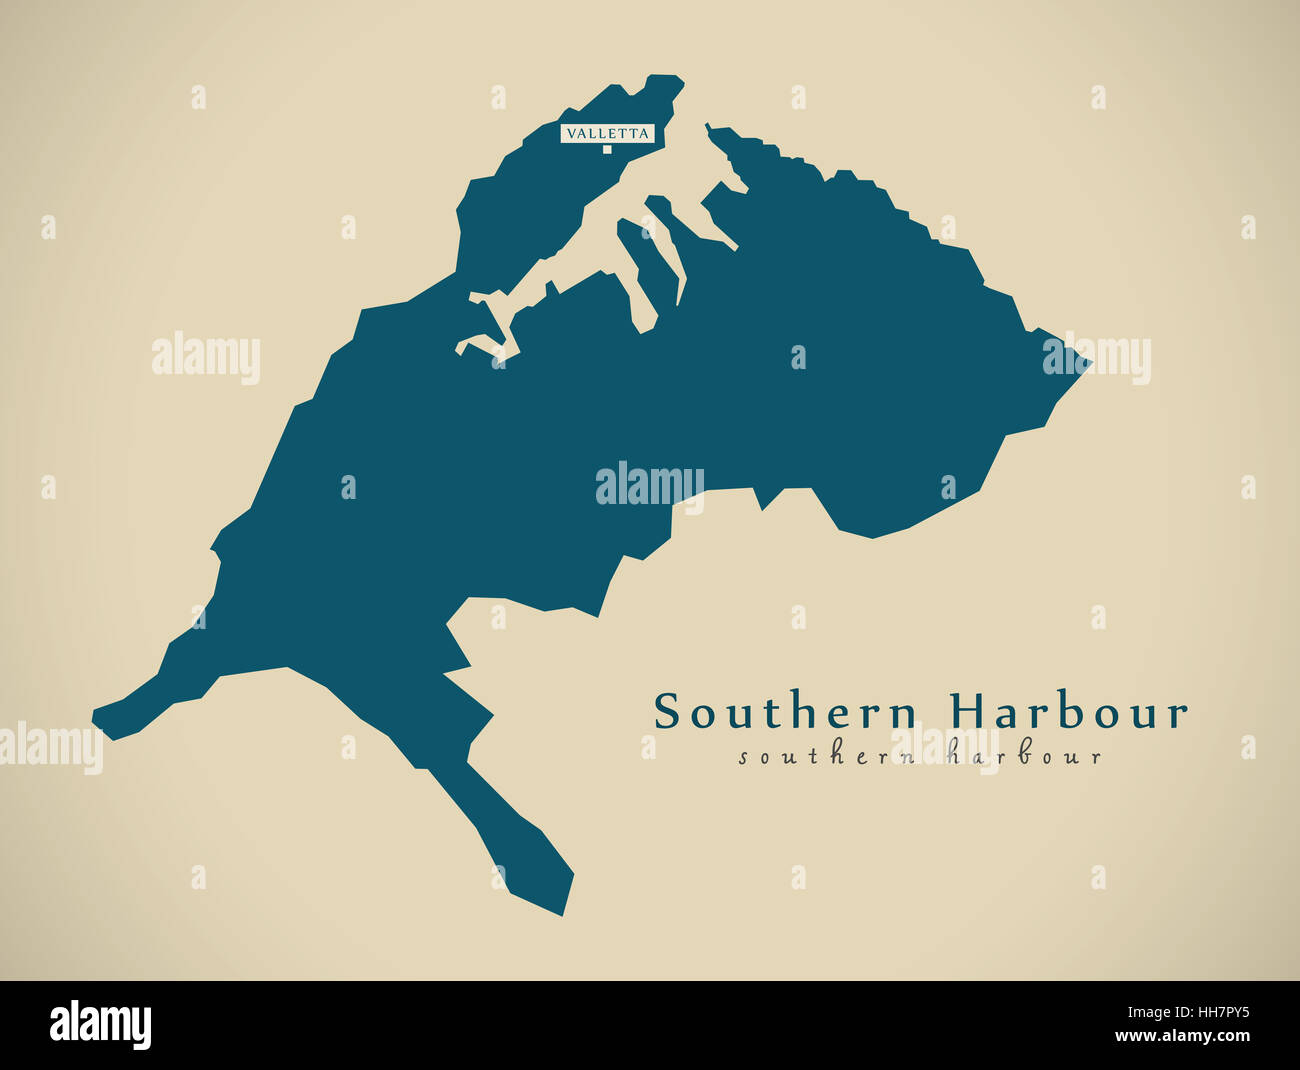 Modern Map - Southern Harbour MT illustration Stock Photo